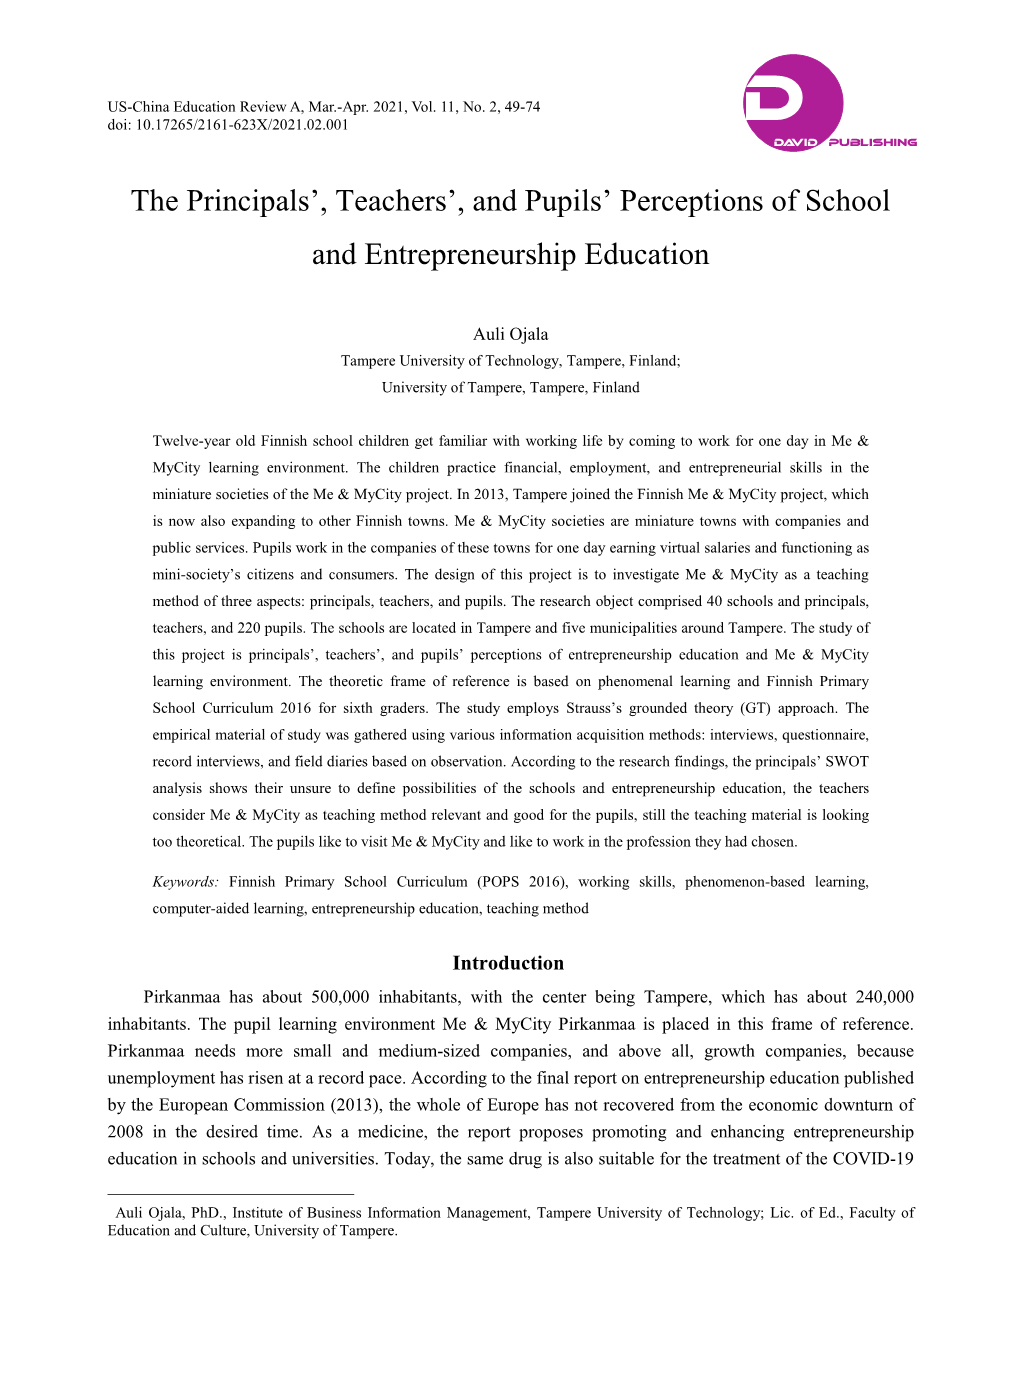 The Principals', Teachers', and Pupils' Perceptions of School And